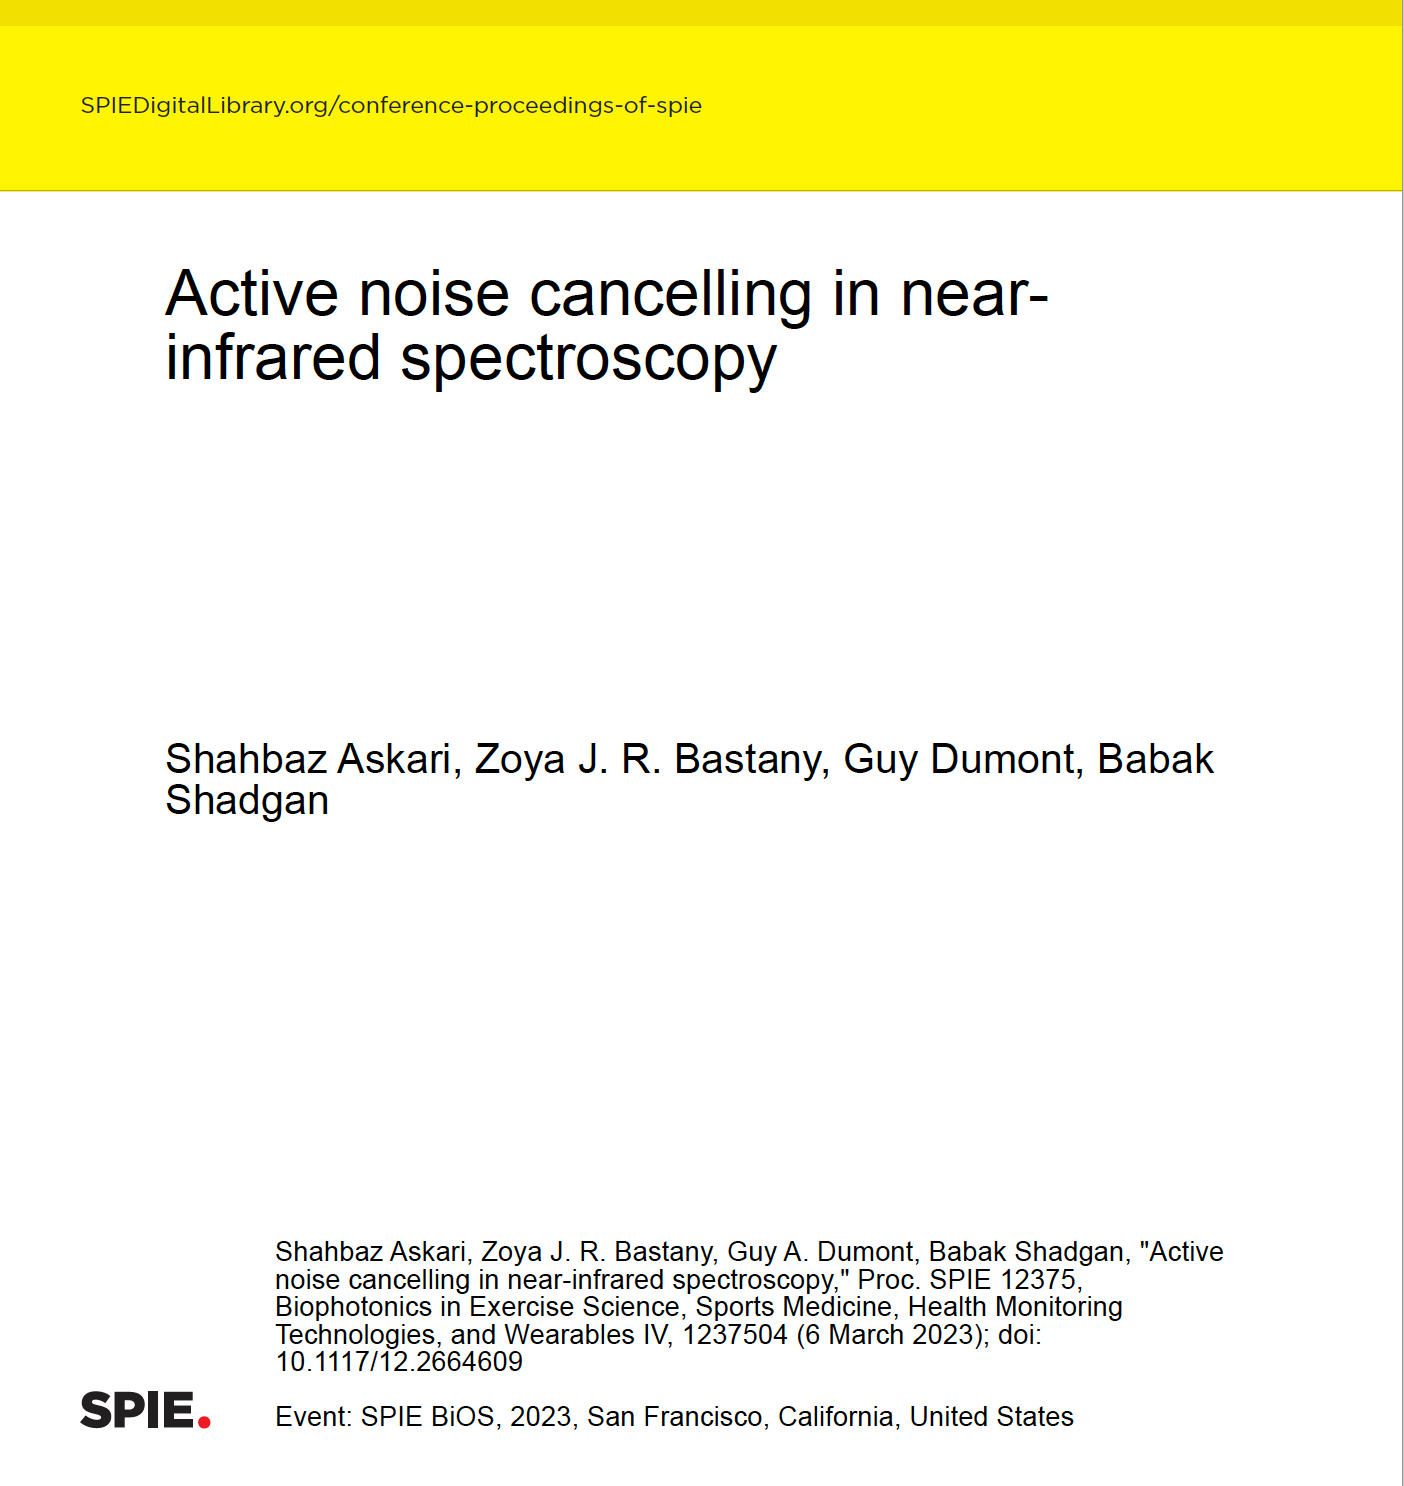 New Publication: Active noise cancelling in near-infrared spectroscopy